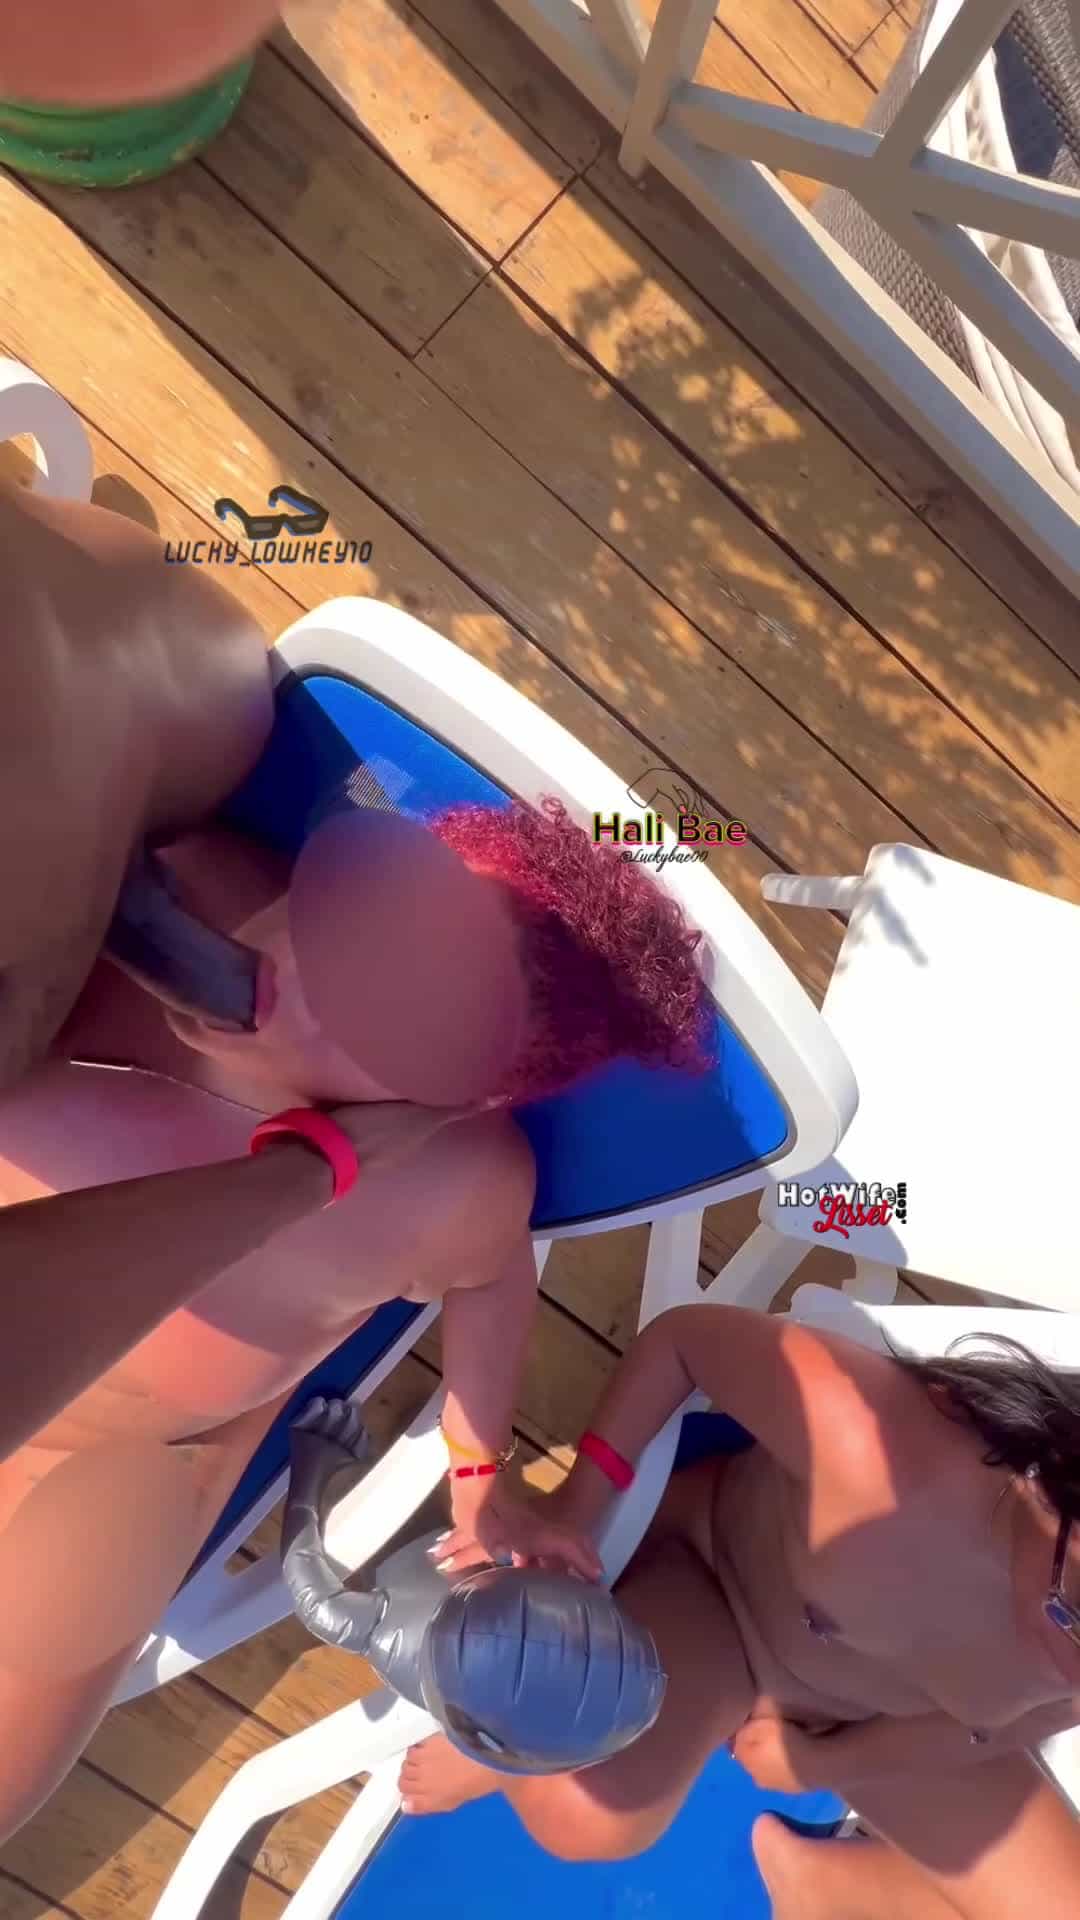 we were just trying to tan, but instead he fed us both some BBC 